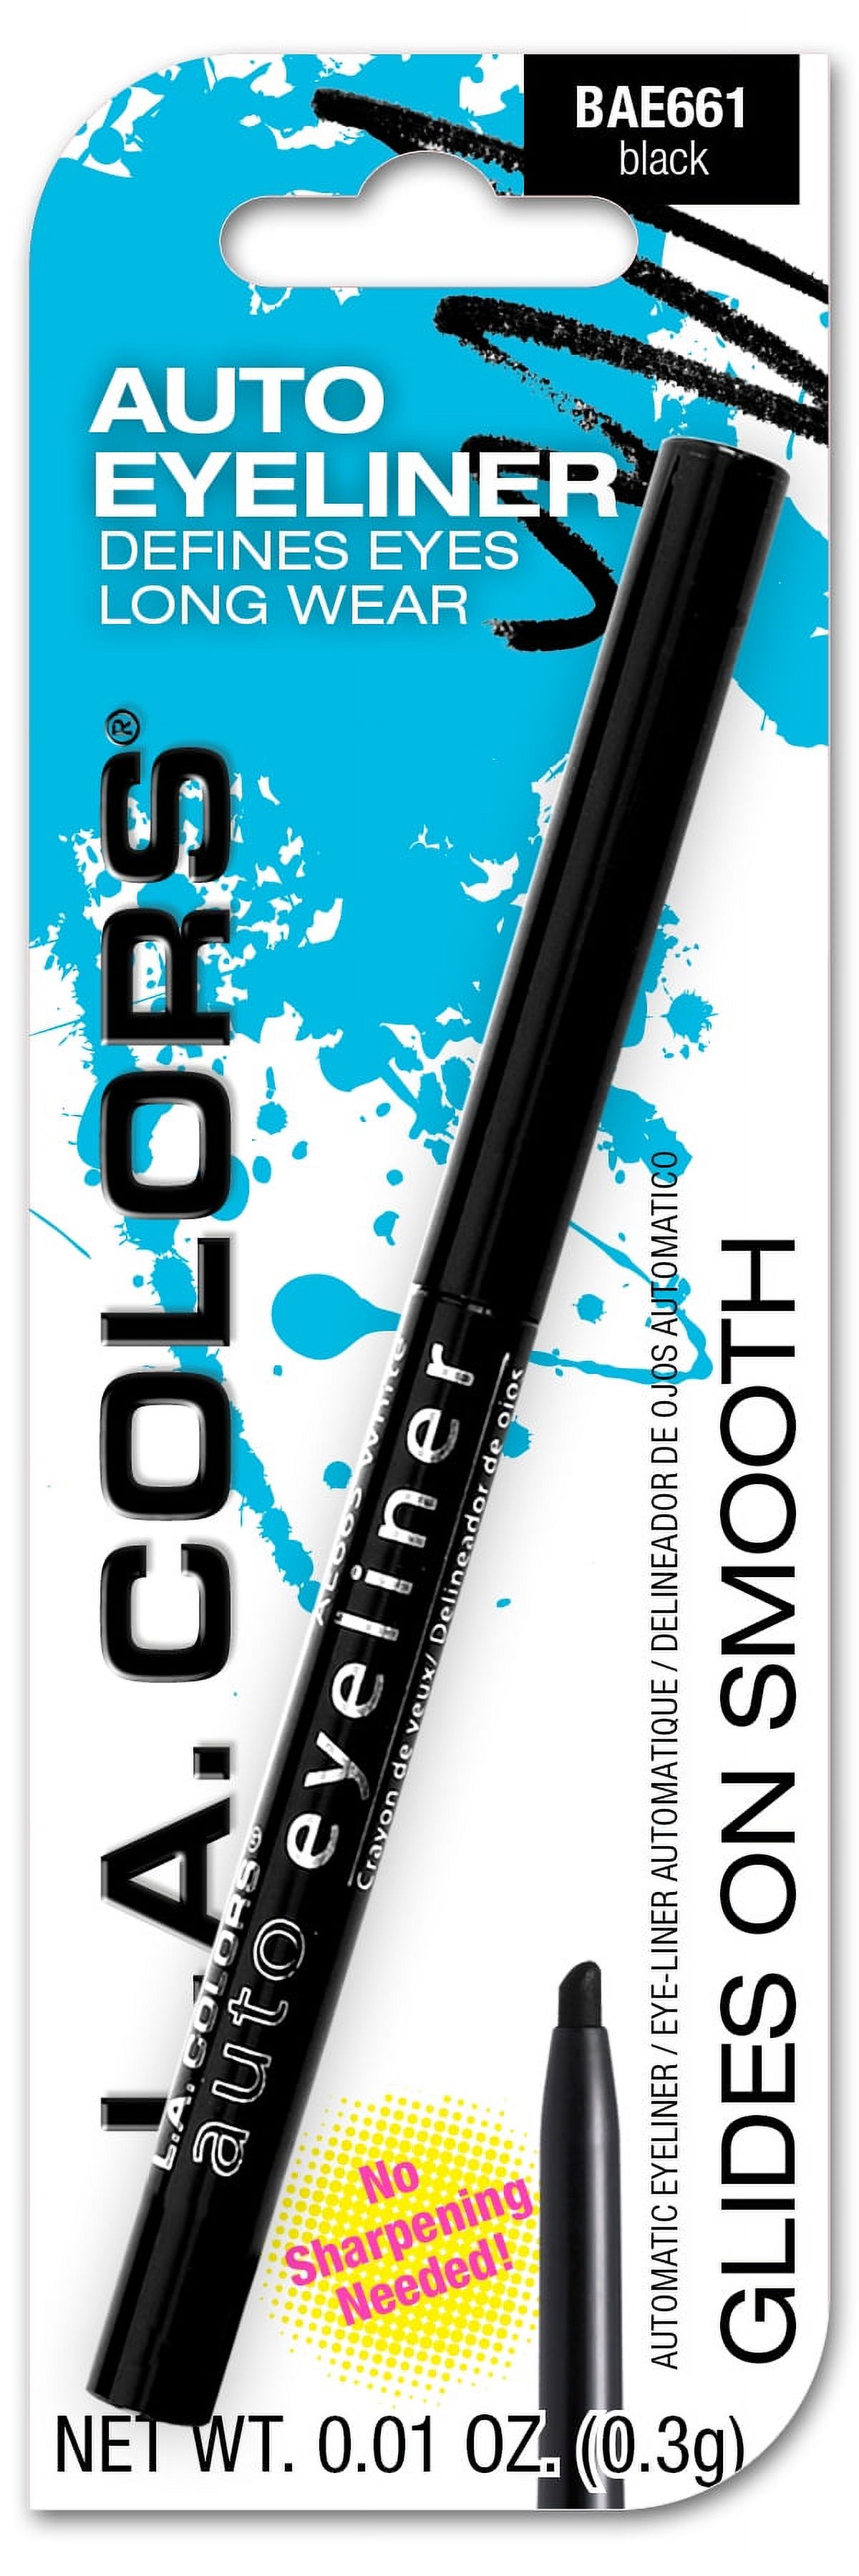 L.A. Colors Auto Eyeliner, Black, 1 Count - image 1 of 4